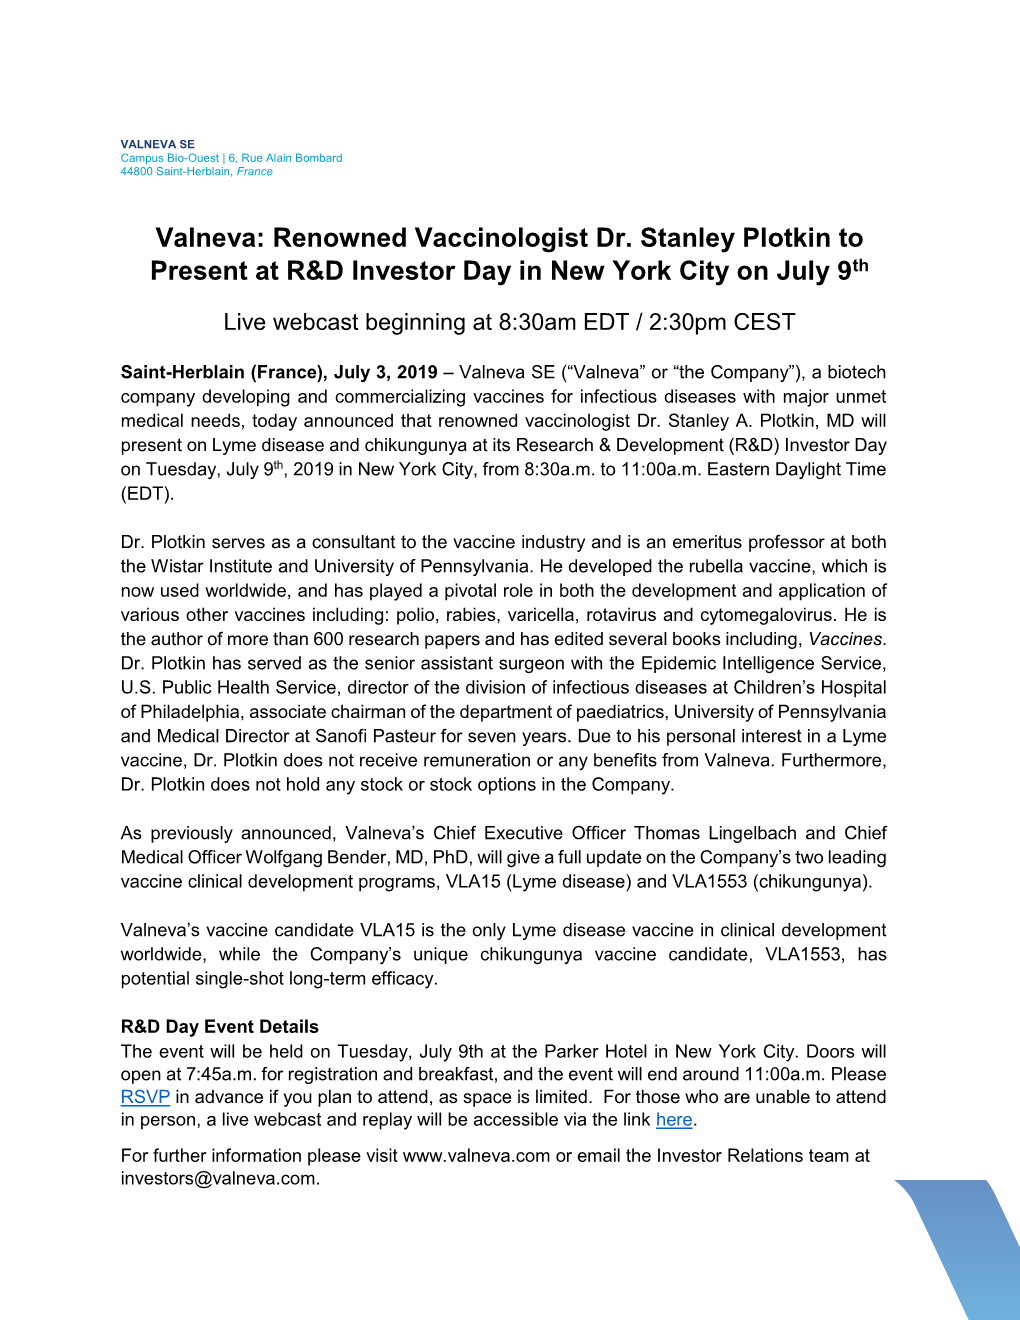 Renowned Vaccinologist Dr. Stanley Plotkin to Present at R&D Investor